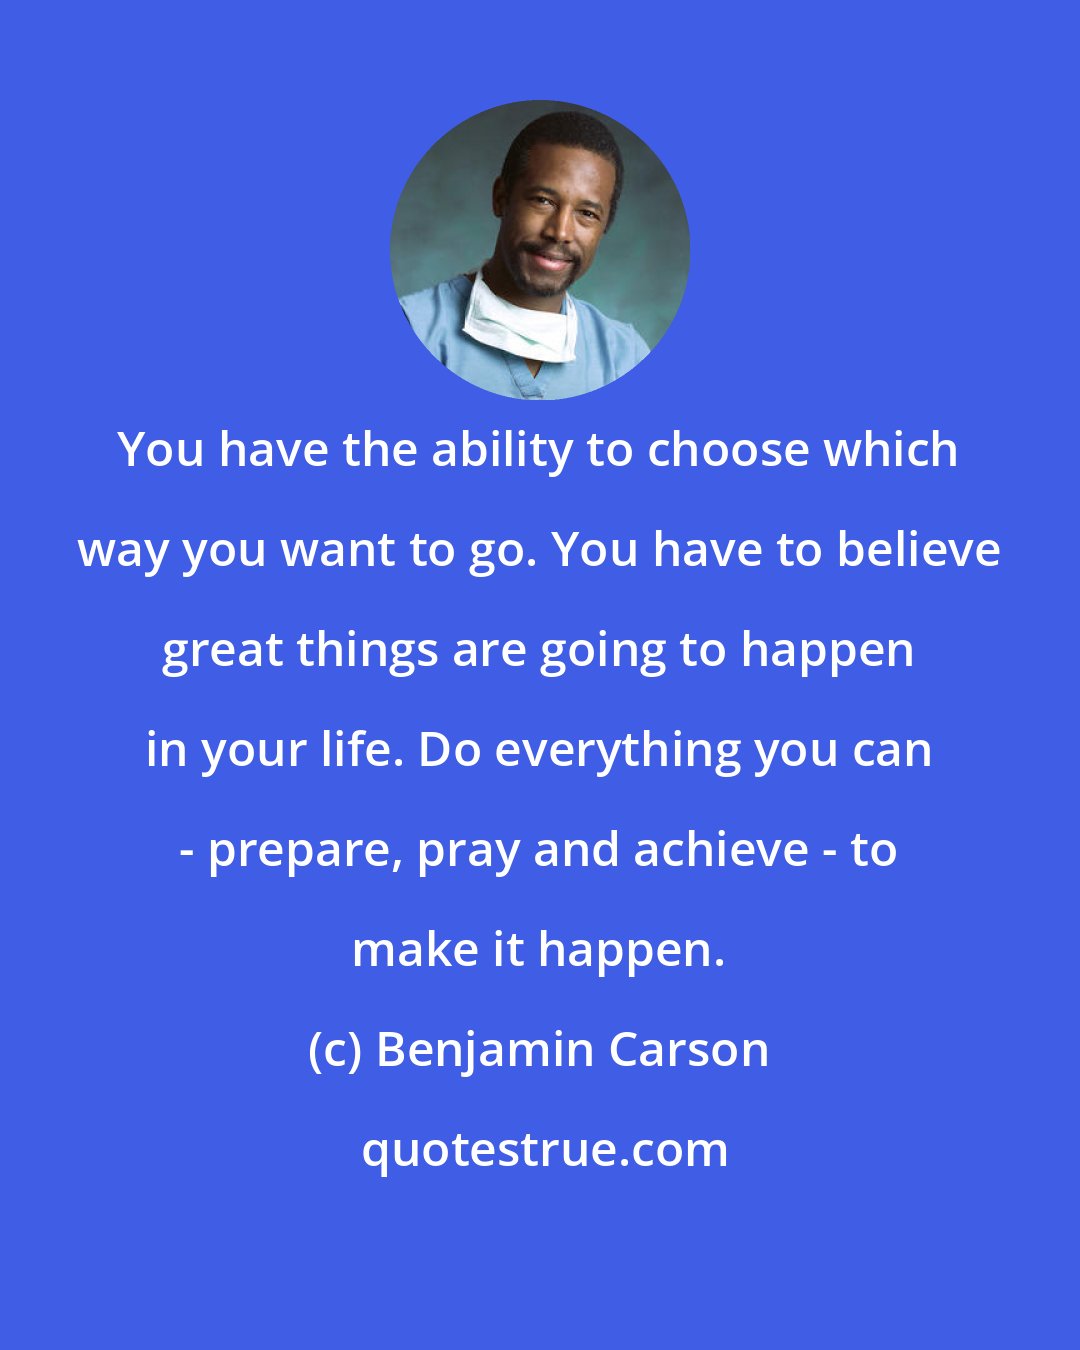 Benjamin Carson: You have the ability to choose which way you want to go. You have to believe great things are going to happen in your life. Do everything you can - prepare, pray and achieve - to make it happen.